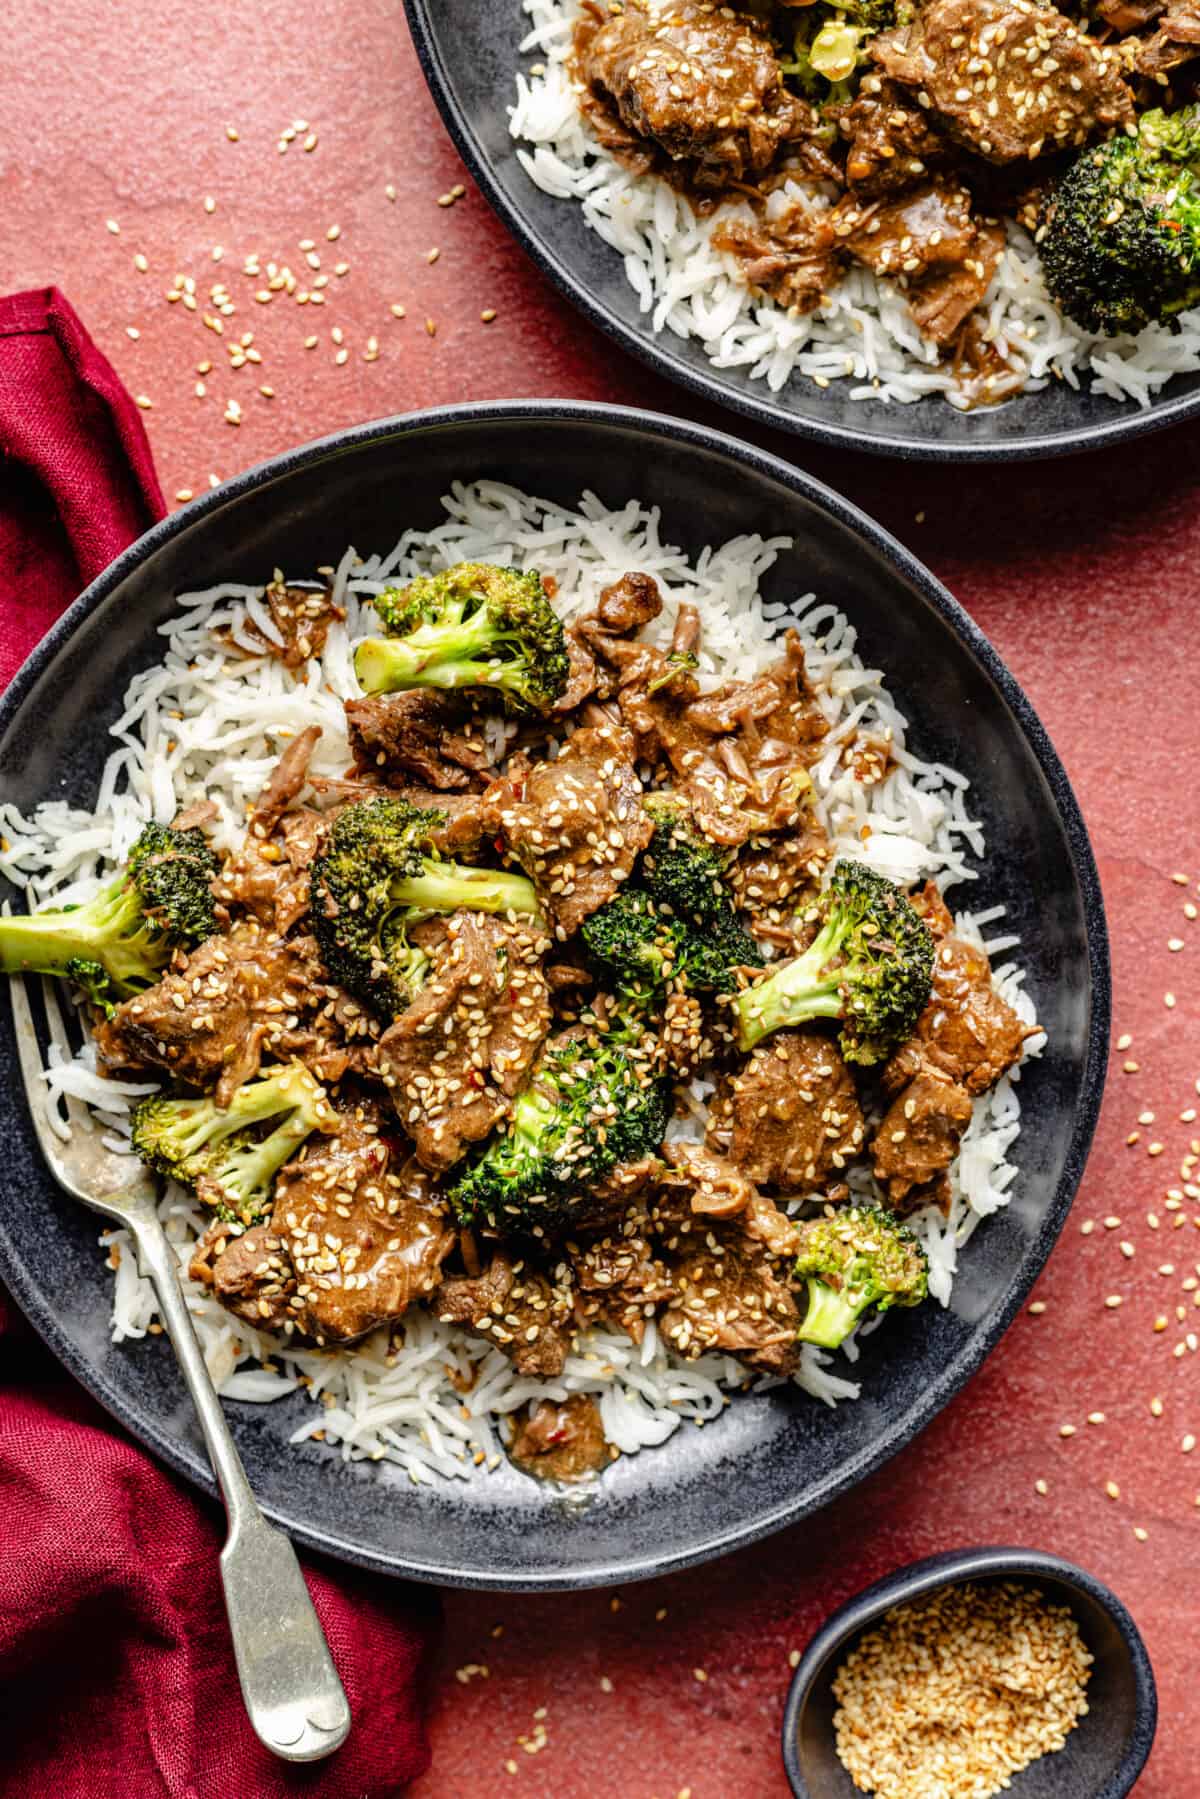 Slow Cooker Beef and Broccoli in bowls on red background.